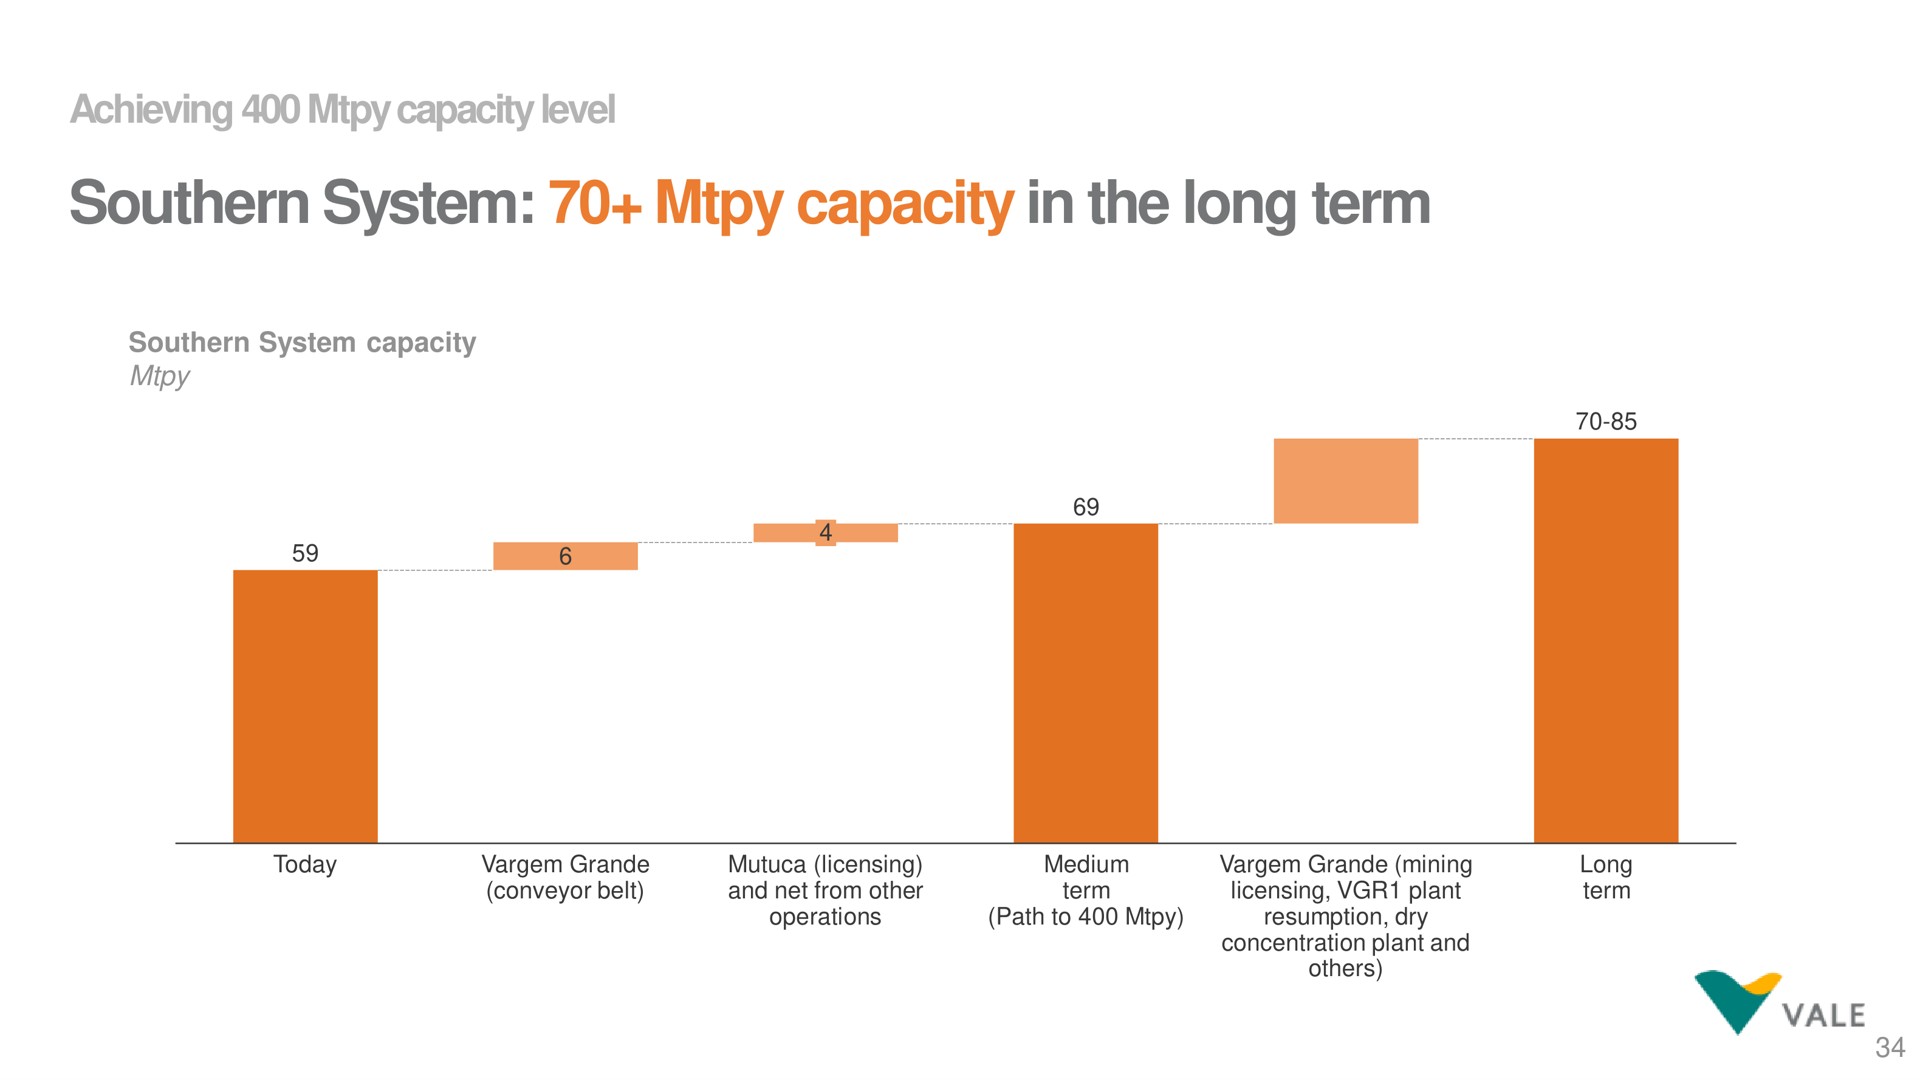 southern system capacity in the long term | Vale